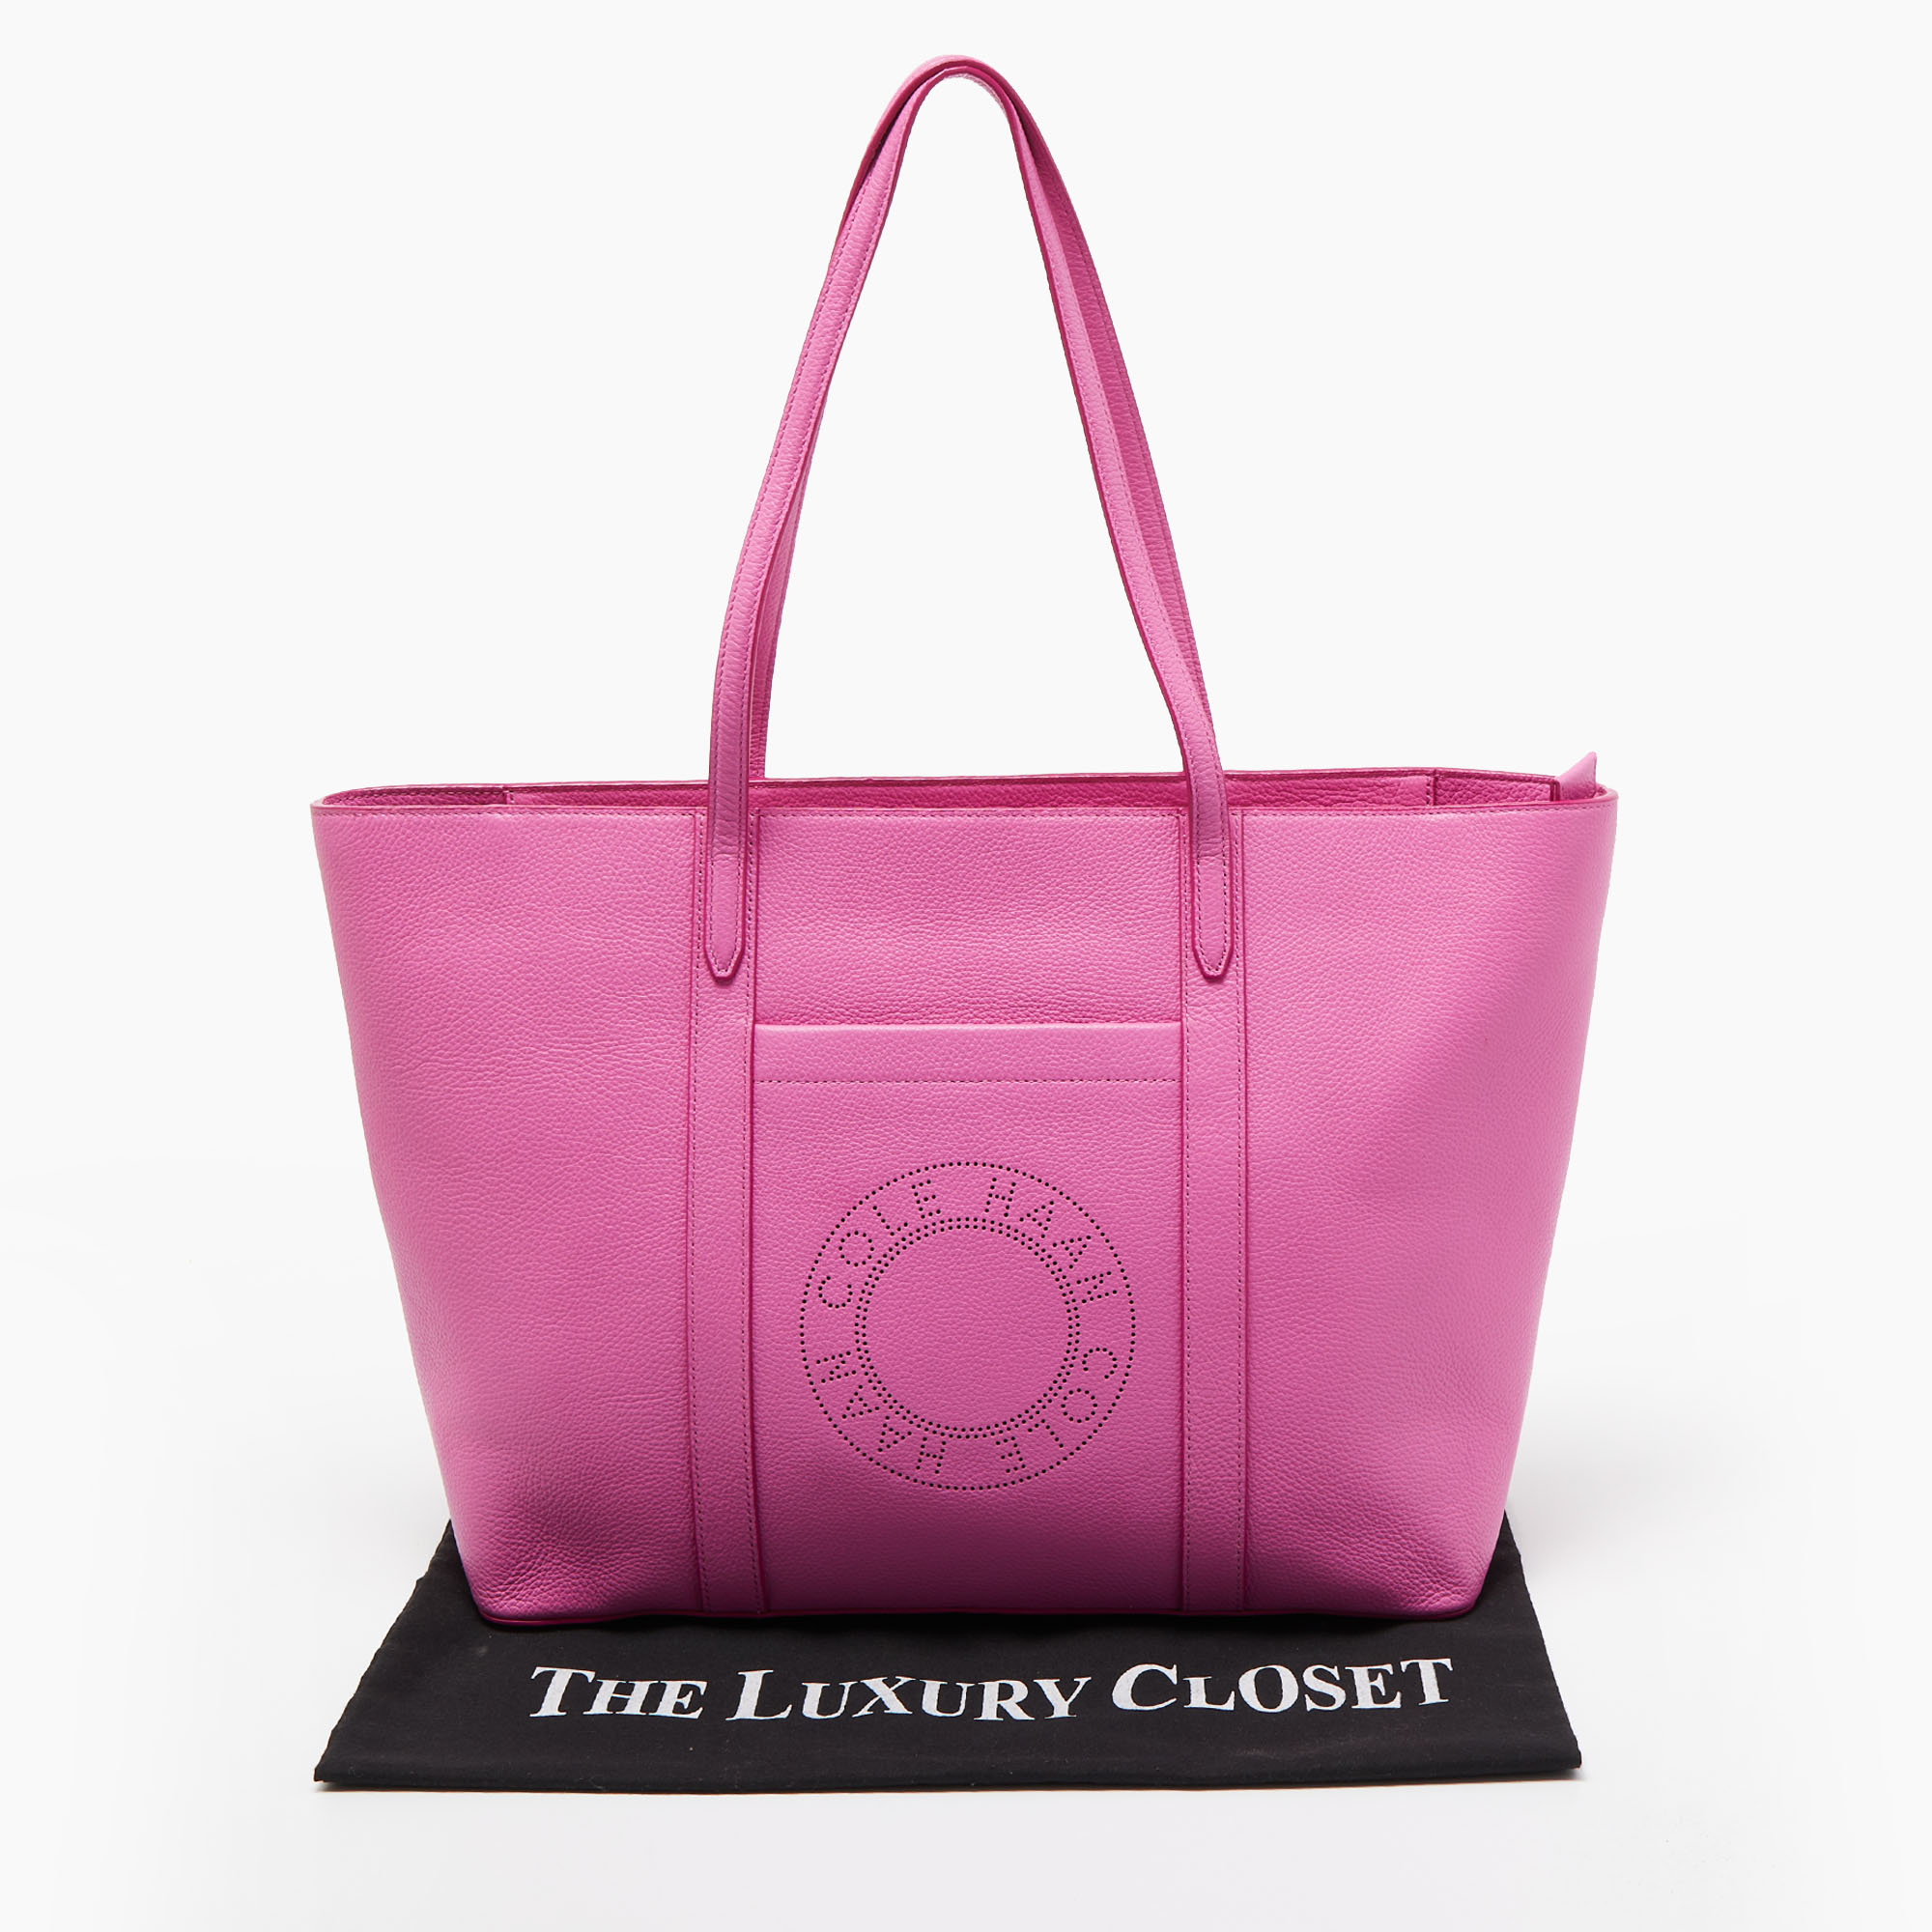 Cole Haan Pink Leather Zip Shopper Tote